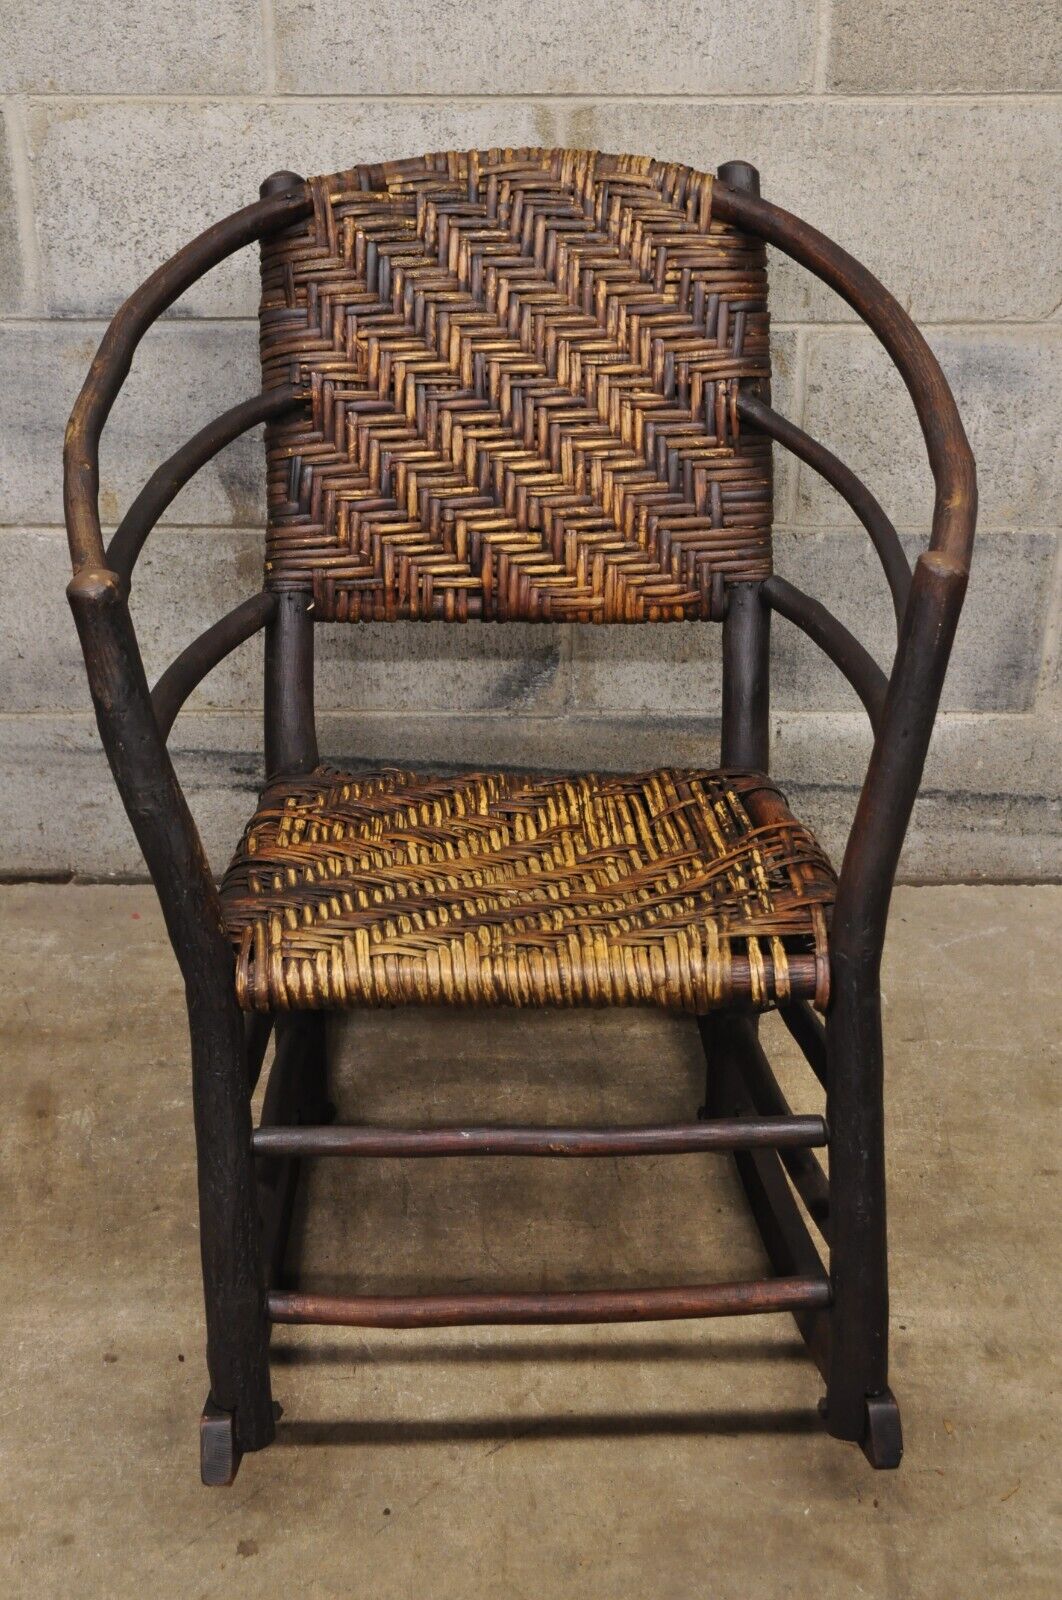 Vintage Adirondack Old Hickory Style Tree Branch Wood Frame Rattan Rocking Chair